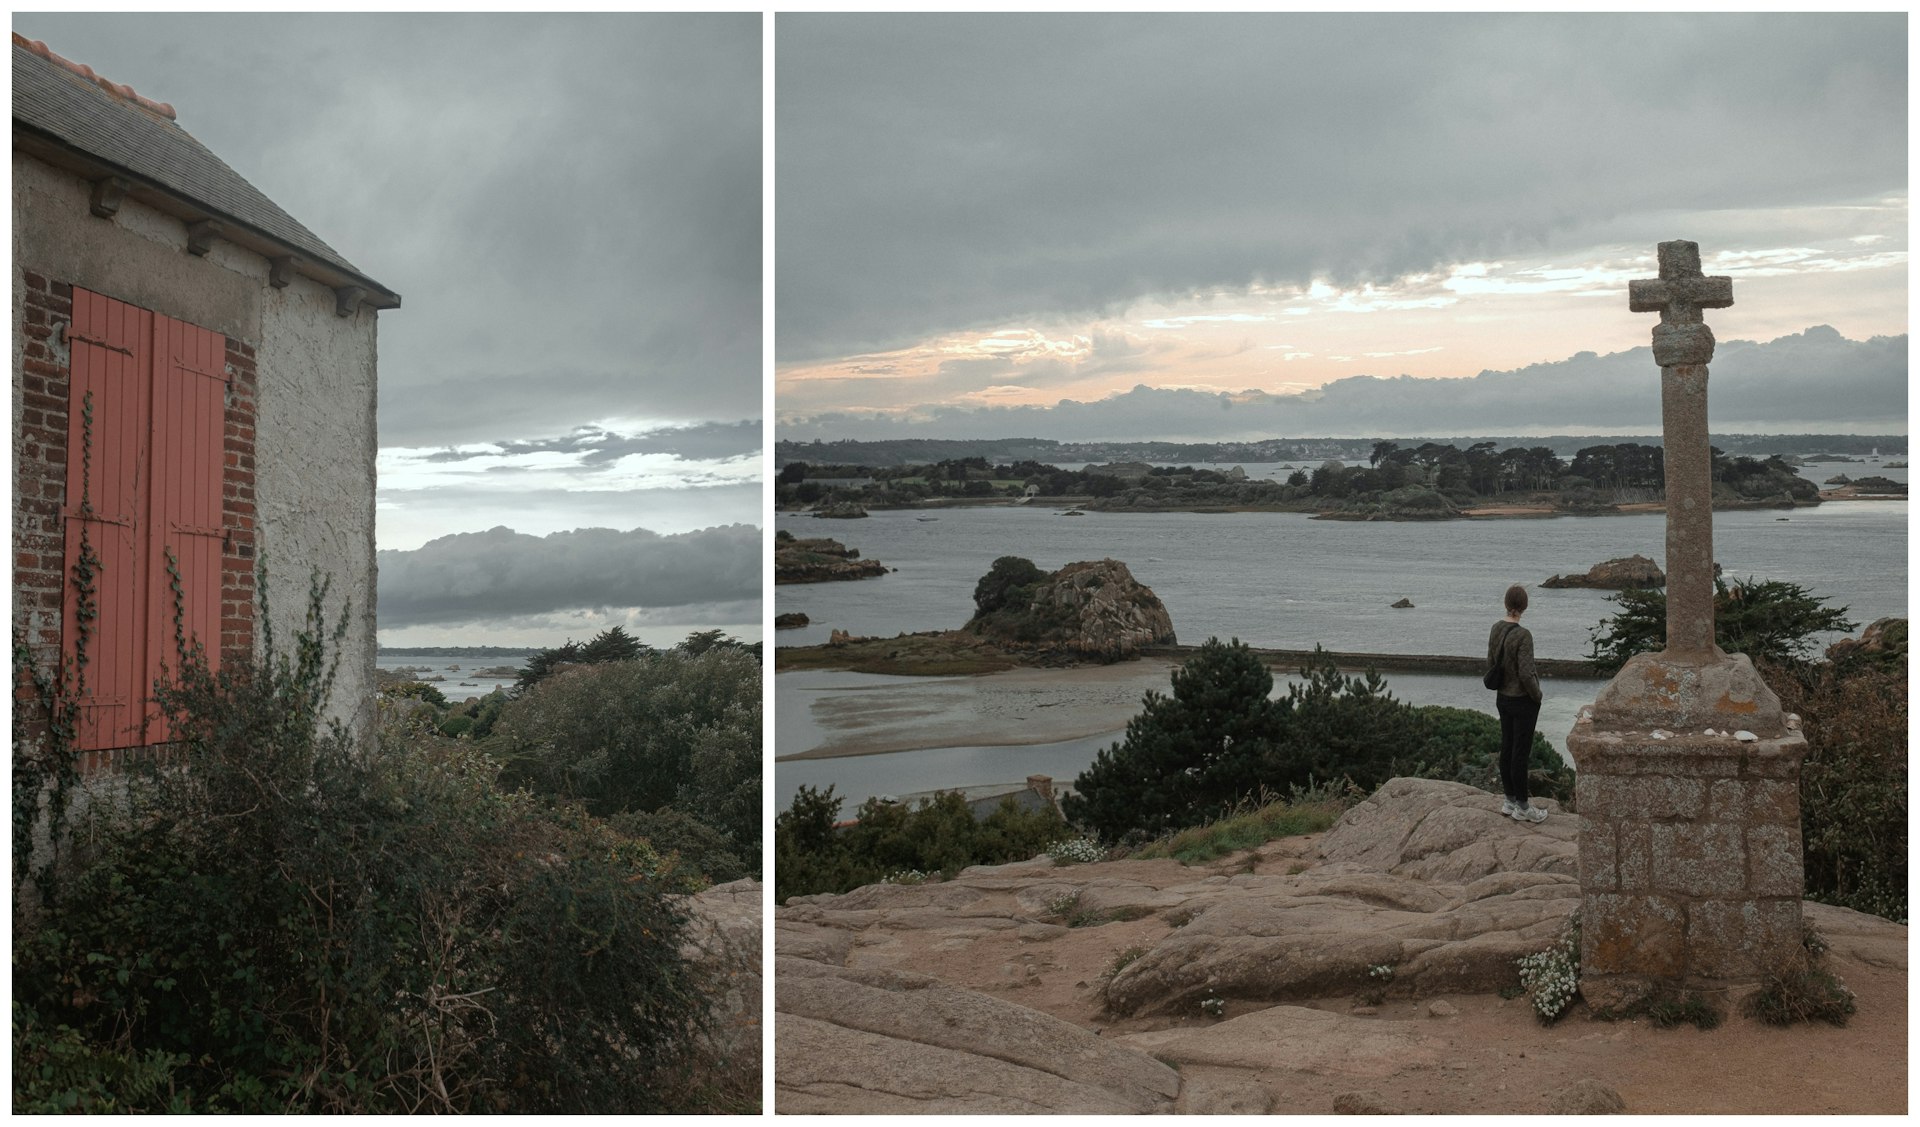 L: An exterior view of a shuttered holiday home. R: A woman hiking on the Breton coast